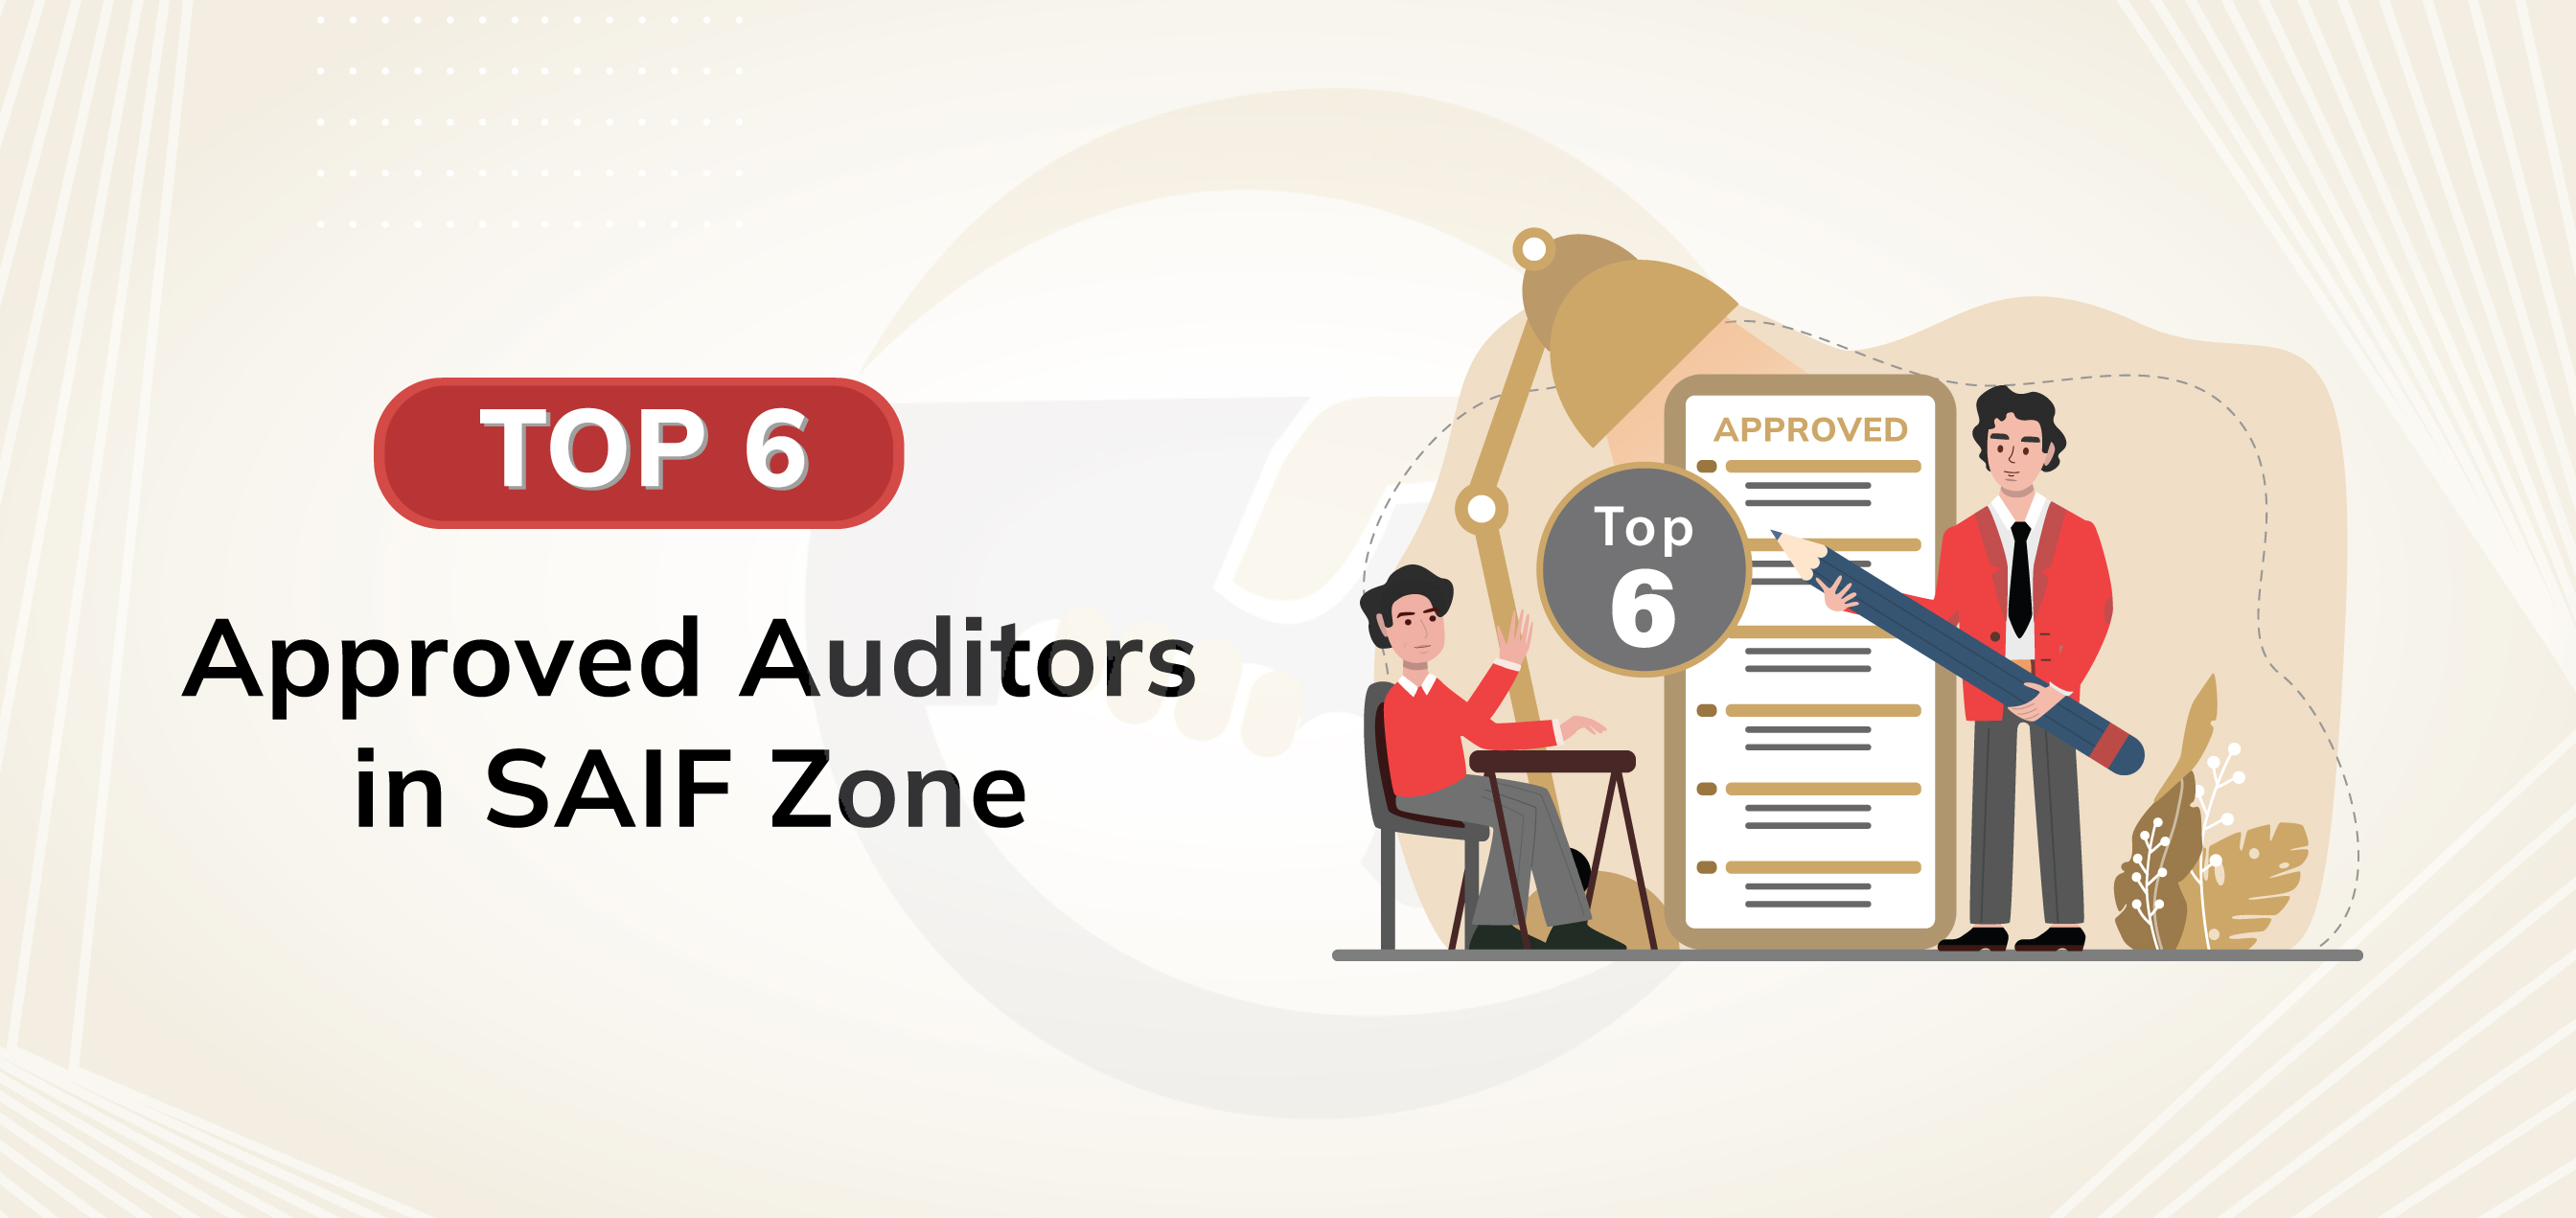 Top Approved Auditors in SAIF Zone